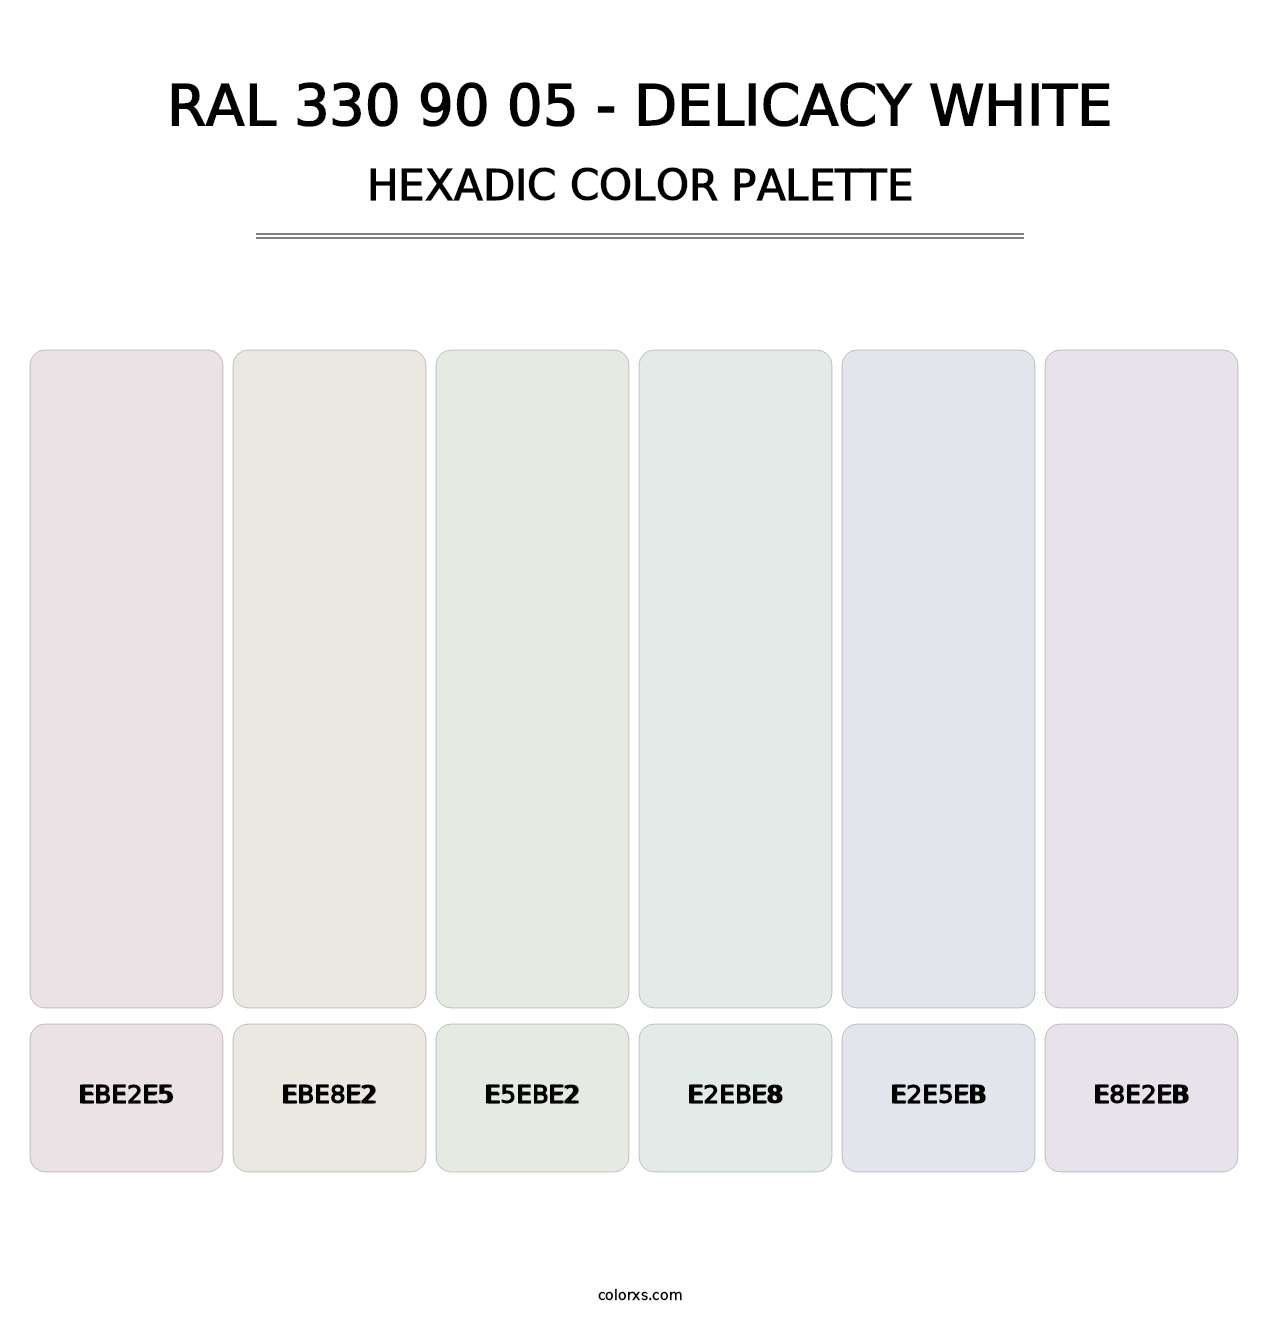 RAL 330 90 05 - Delicacy White - Hexadic Color Palette